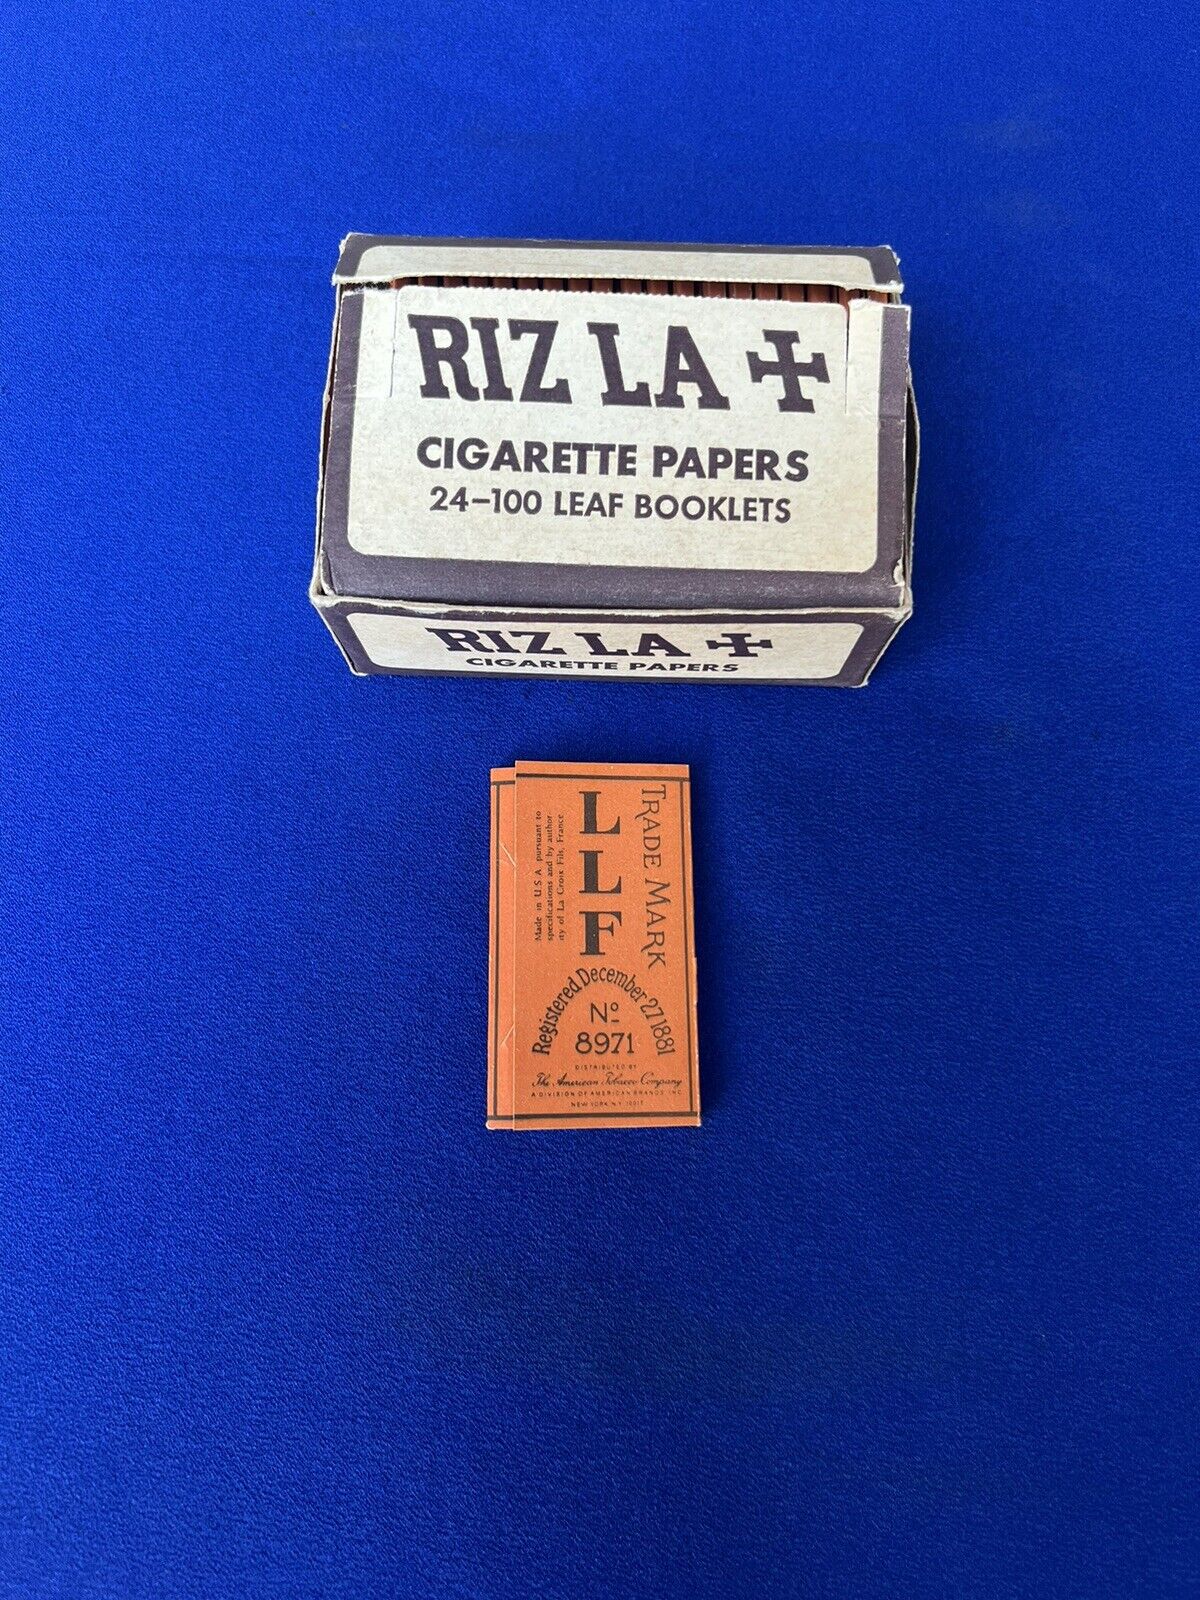 Vtg RIZLA + Cigarette Rolling Papers 20 X100 Booklets + Box Rare NOS Tobacciana. Available Now for 59.99